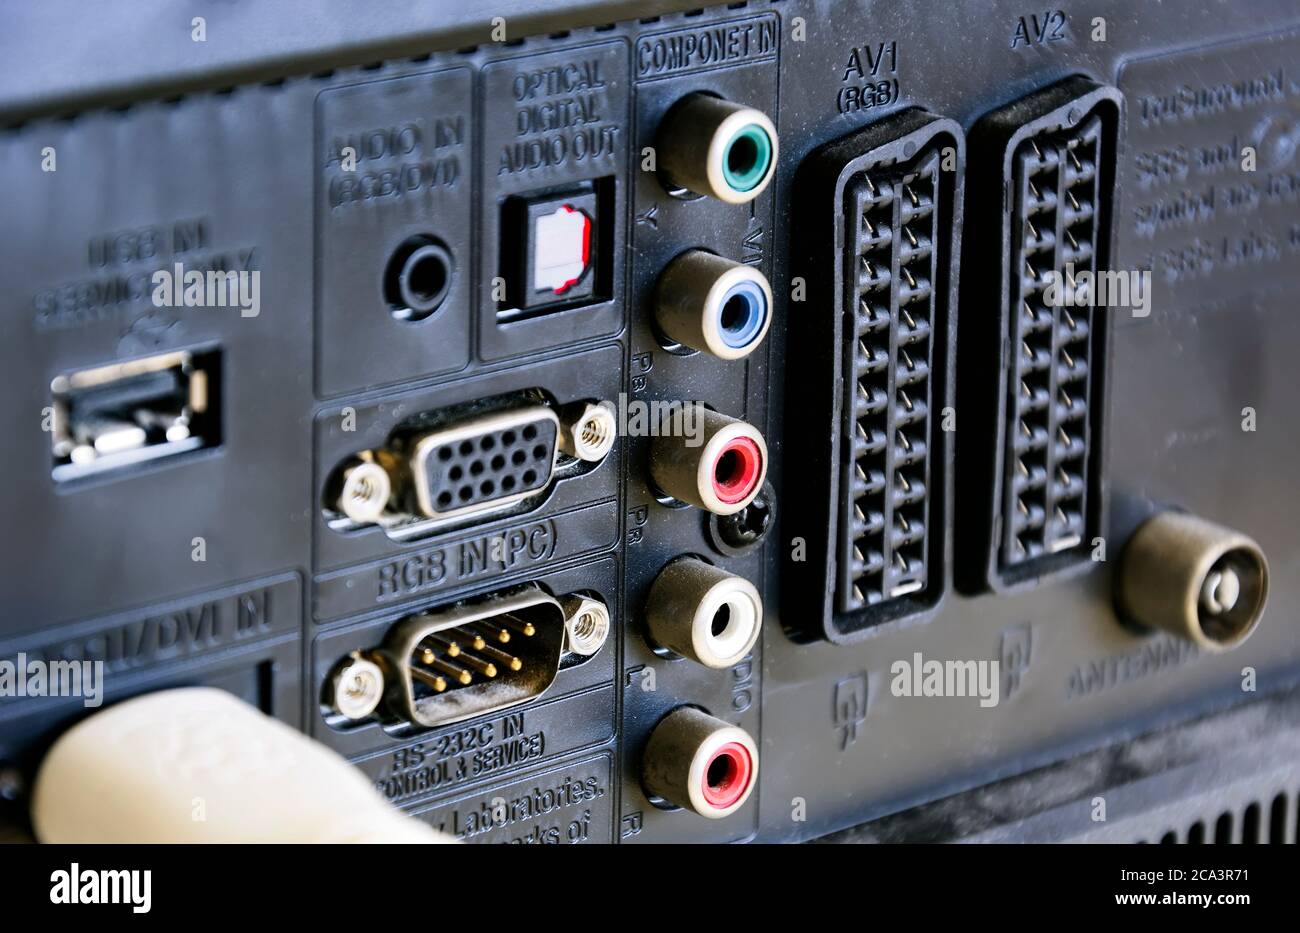 Rear panel of a television with sockets for audio / video, scart connections and for rgb video input for the monitor. Technology and connections betwe Stock Photo